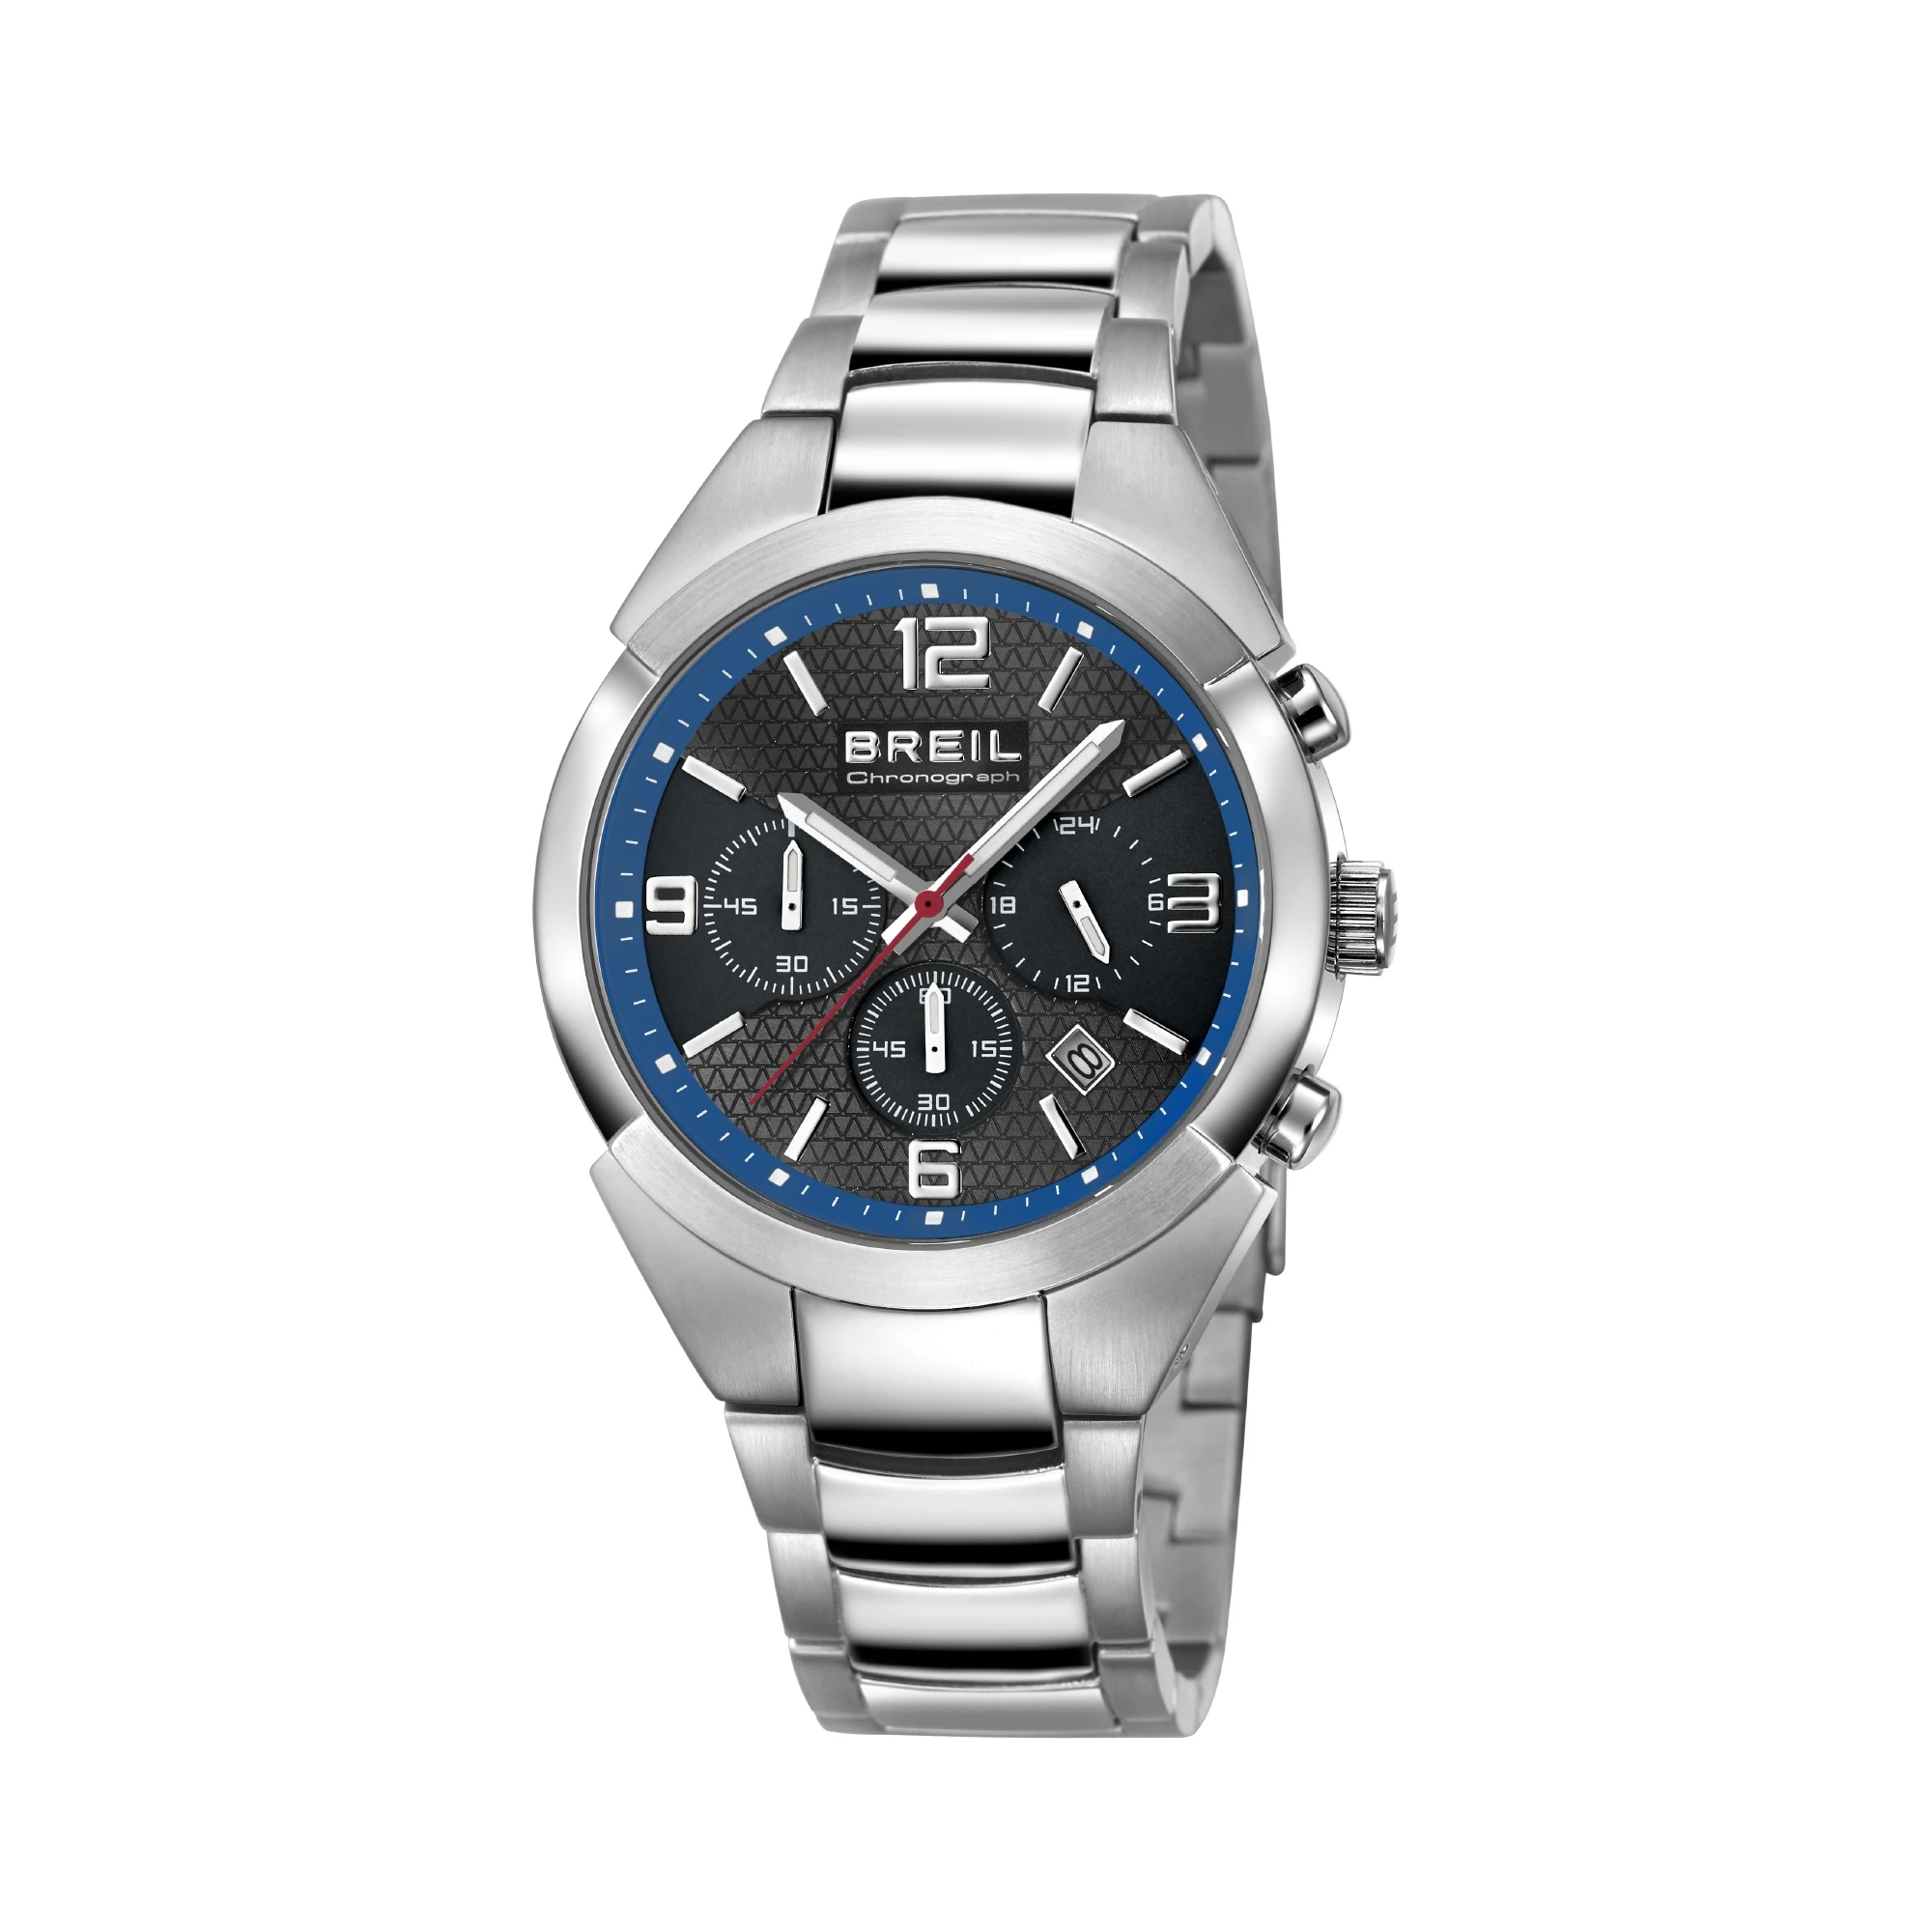 GAP - STAINLESS STEEL CHRONOGRAPH WITH BLUE DETAILS - 1 - TW1379 | Breil